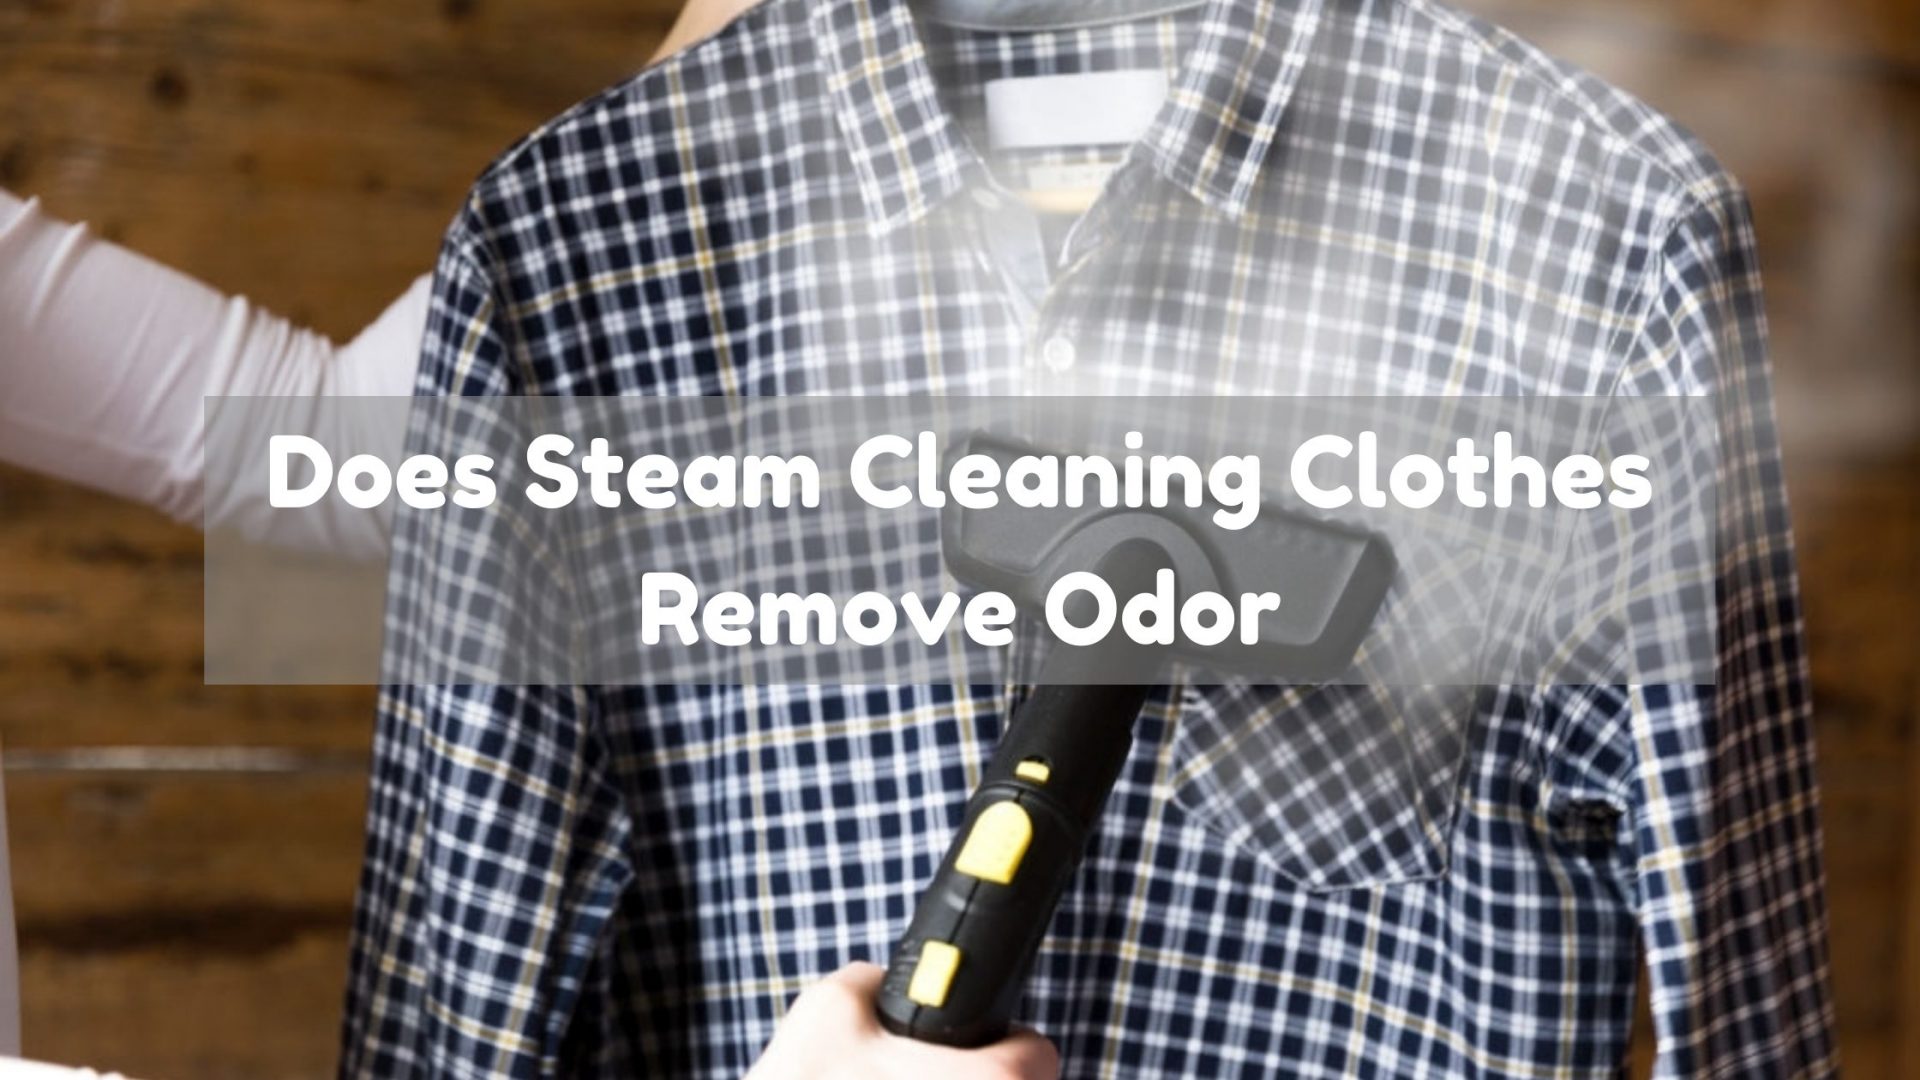 Does Steam Cleaning Clothes Remove Odor